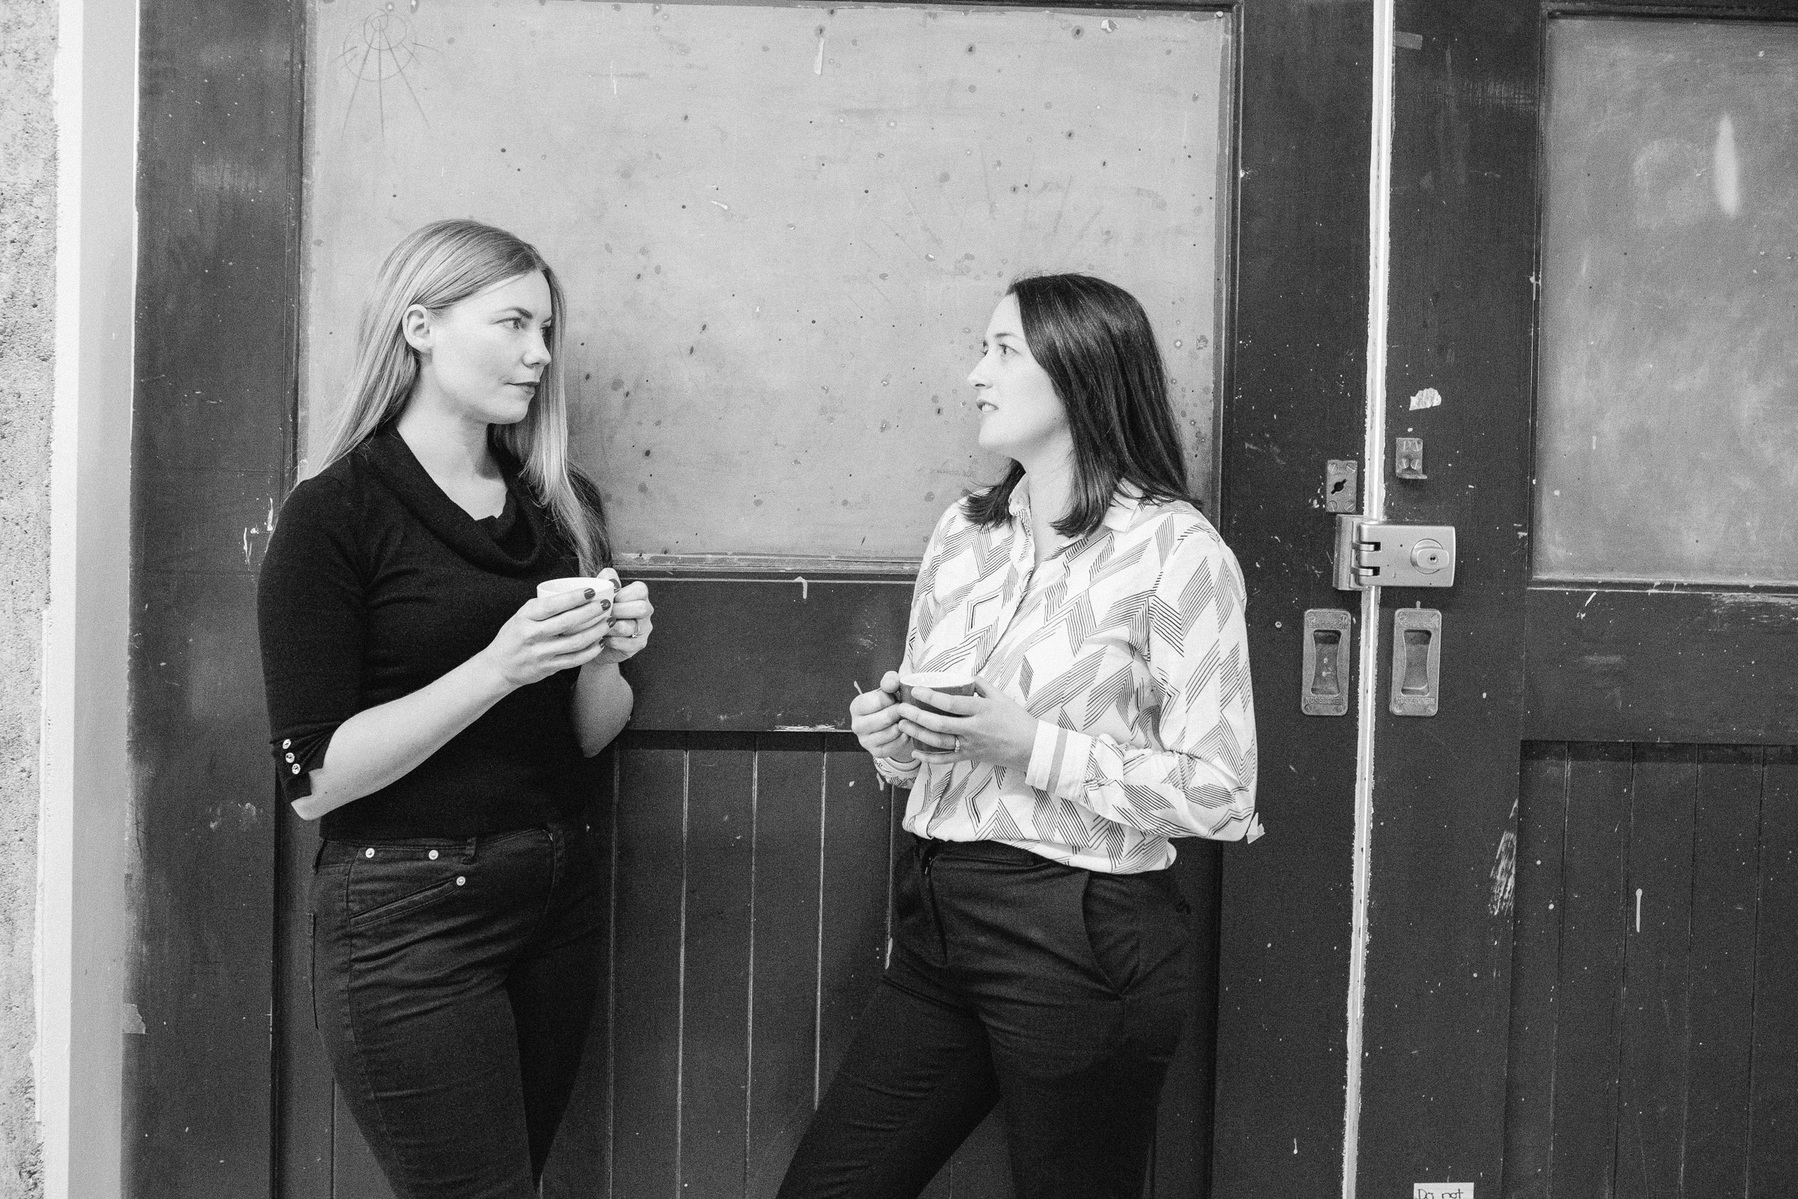 Two female colleagues stand with coffee cups in a hallway discussing their work